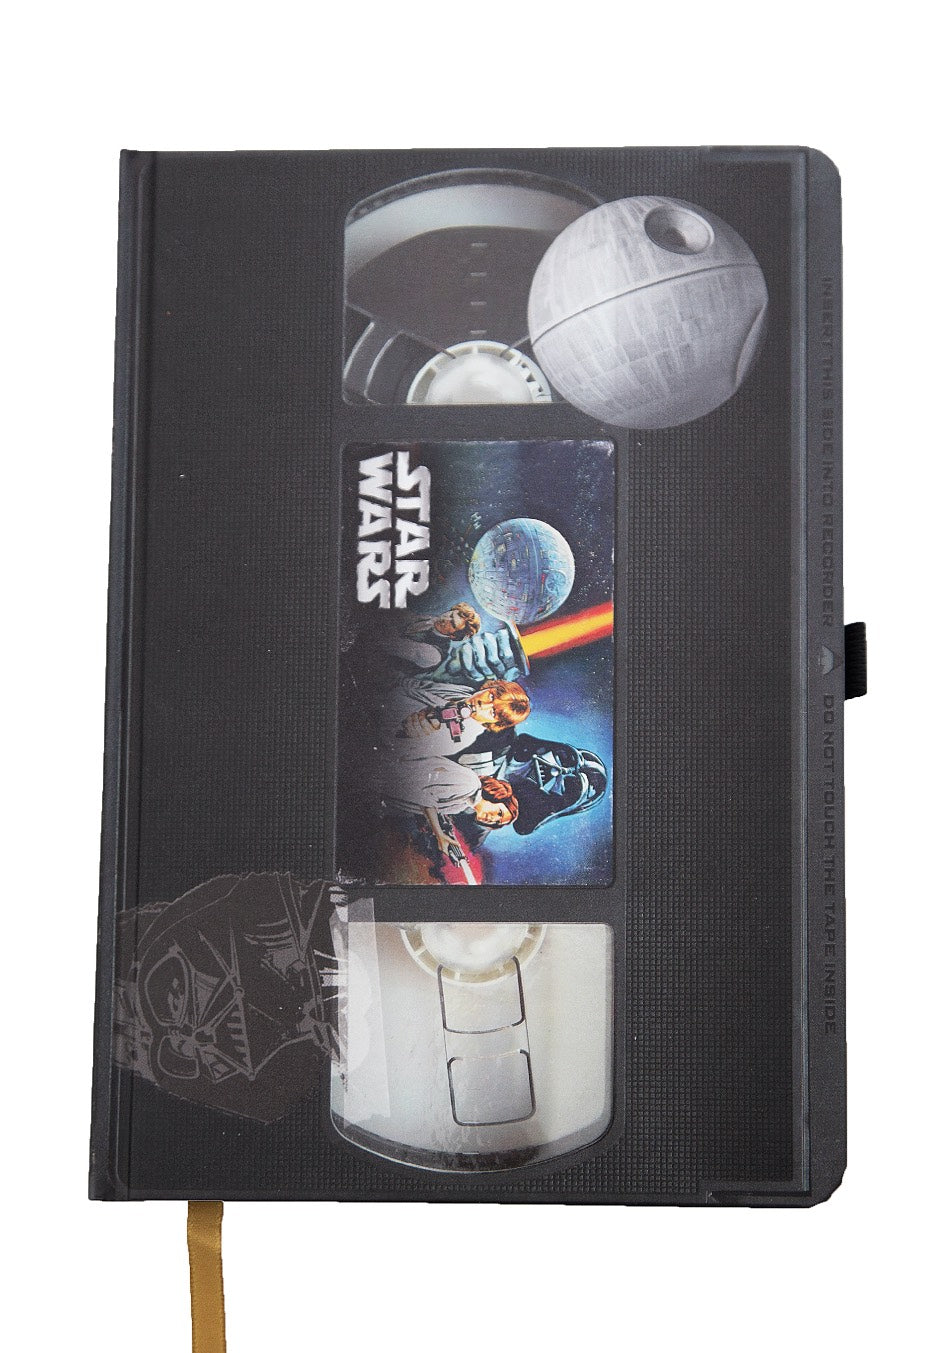 Star Wars - A New Hope VHS - Notebook